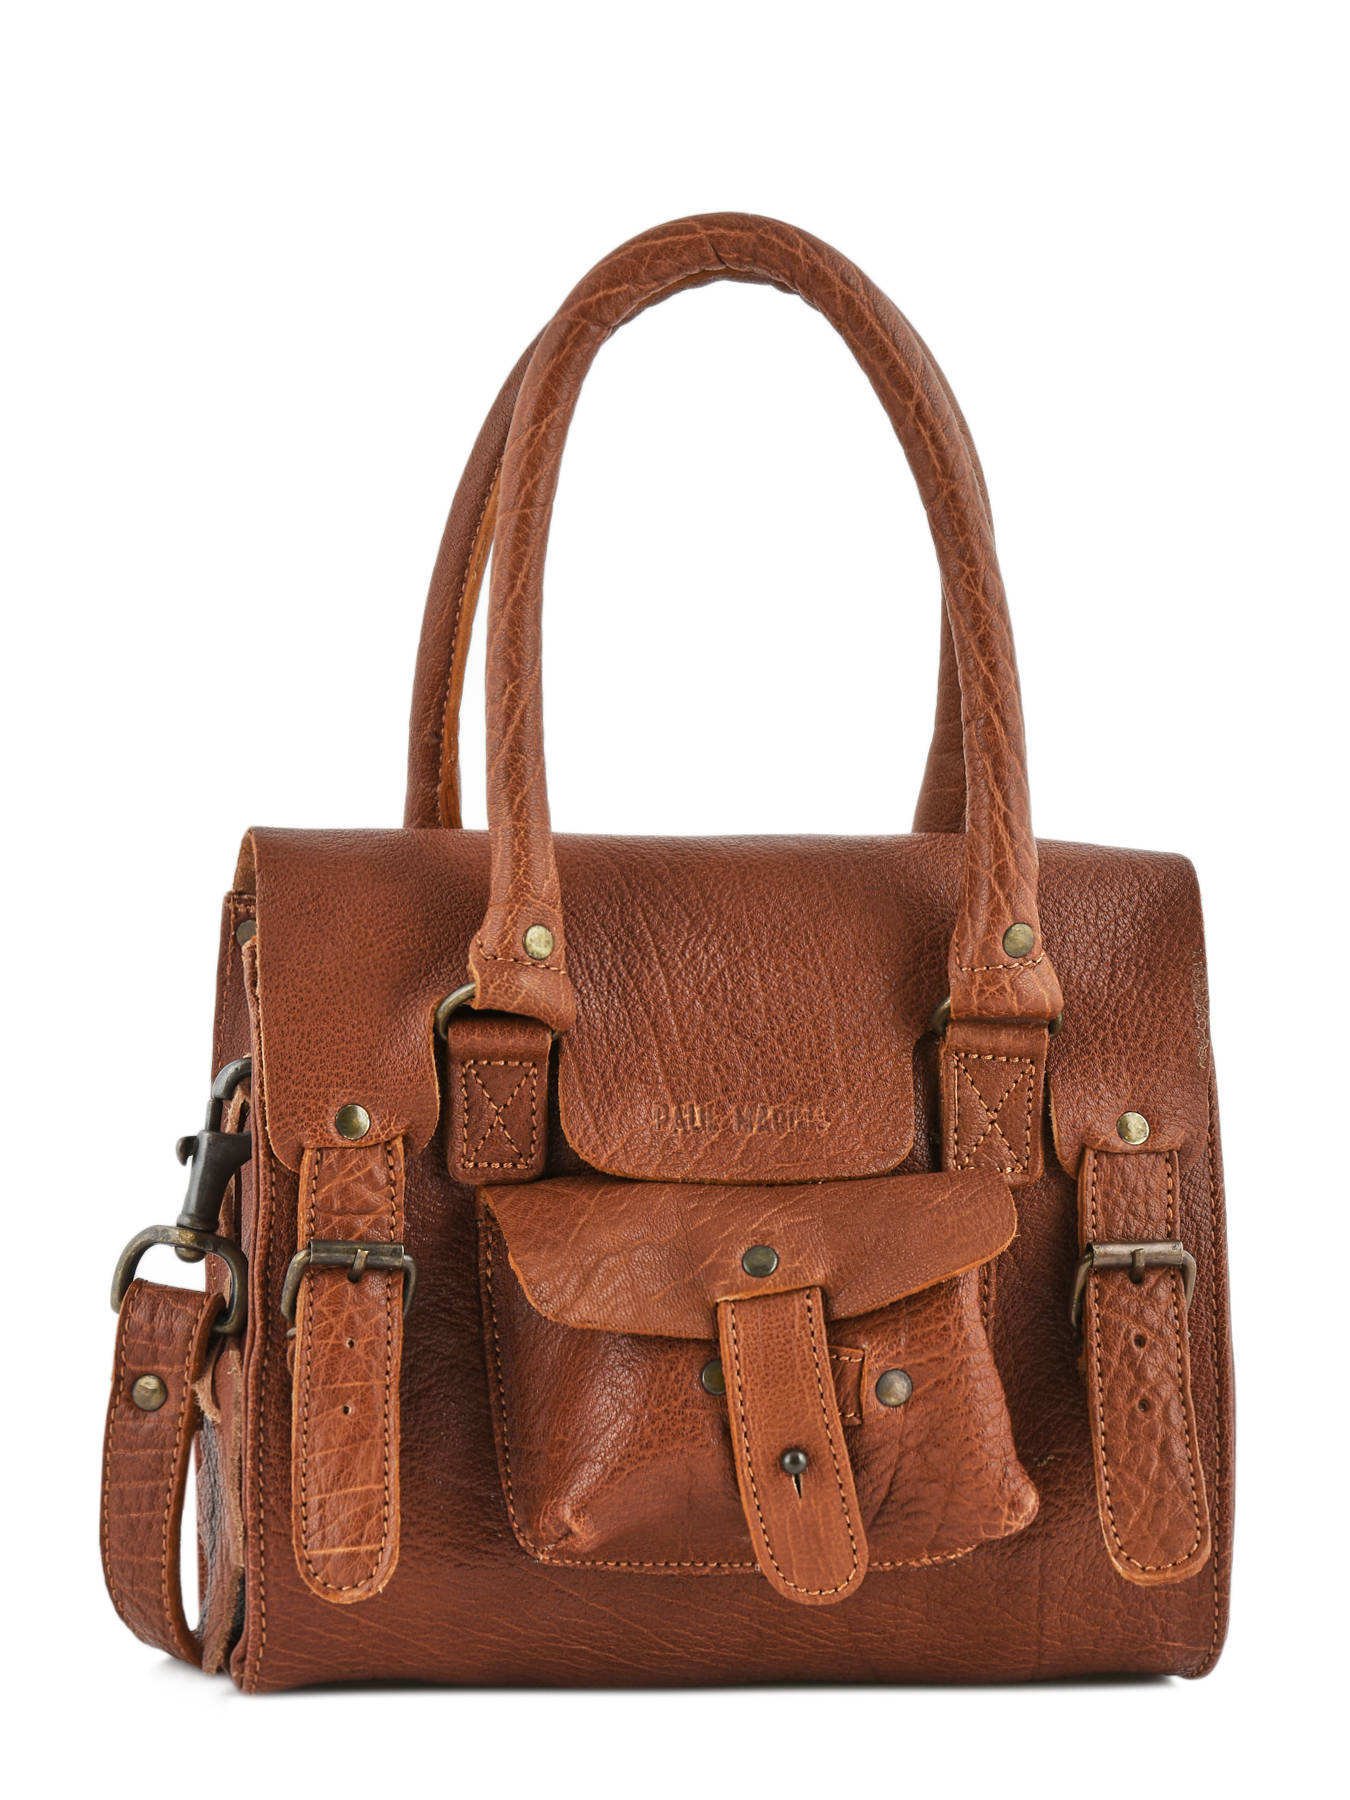 Shopping > sac a main paul marius soldes, Up to 71% OFF